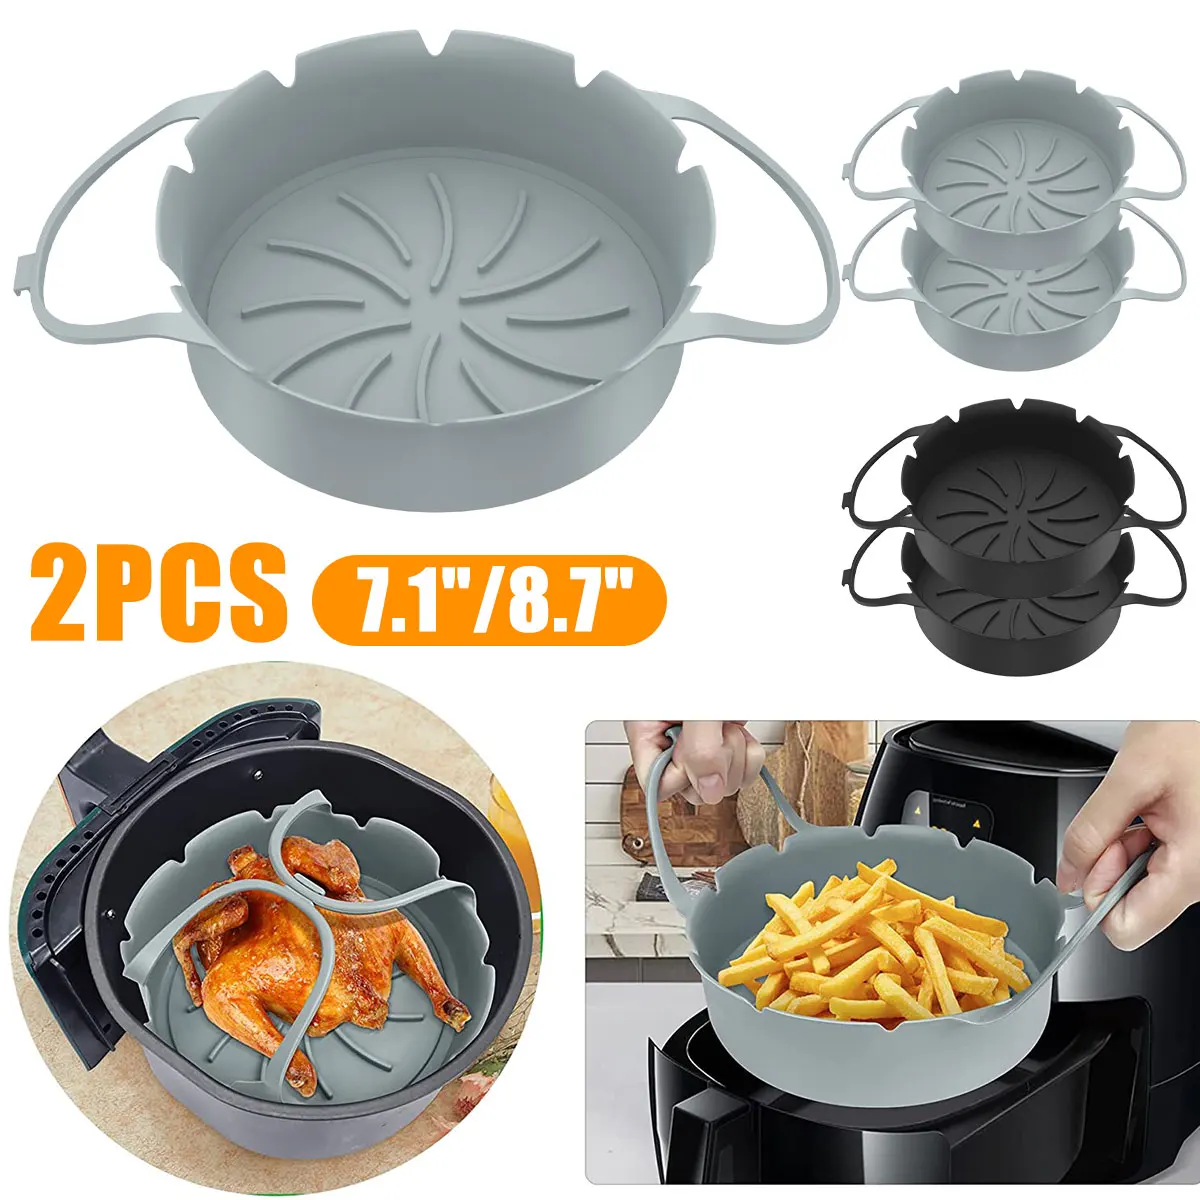 https://ae01.alicdn.com/kf/S7afcd08822954472b394d05f463d3f44h/2Pcs-Air-Fryer-Silicone-Basket-Silicone-Mold-Airfryer-Oven-Baking-Tray-Pizza-Fried-Chicken-Basket-Reusable.jpg